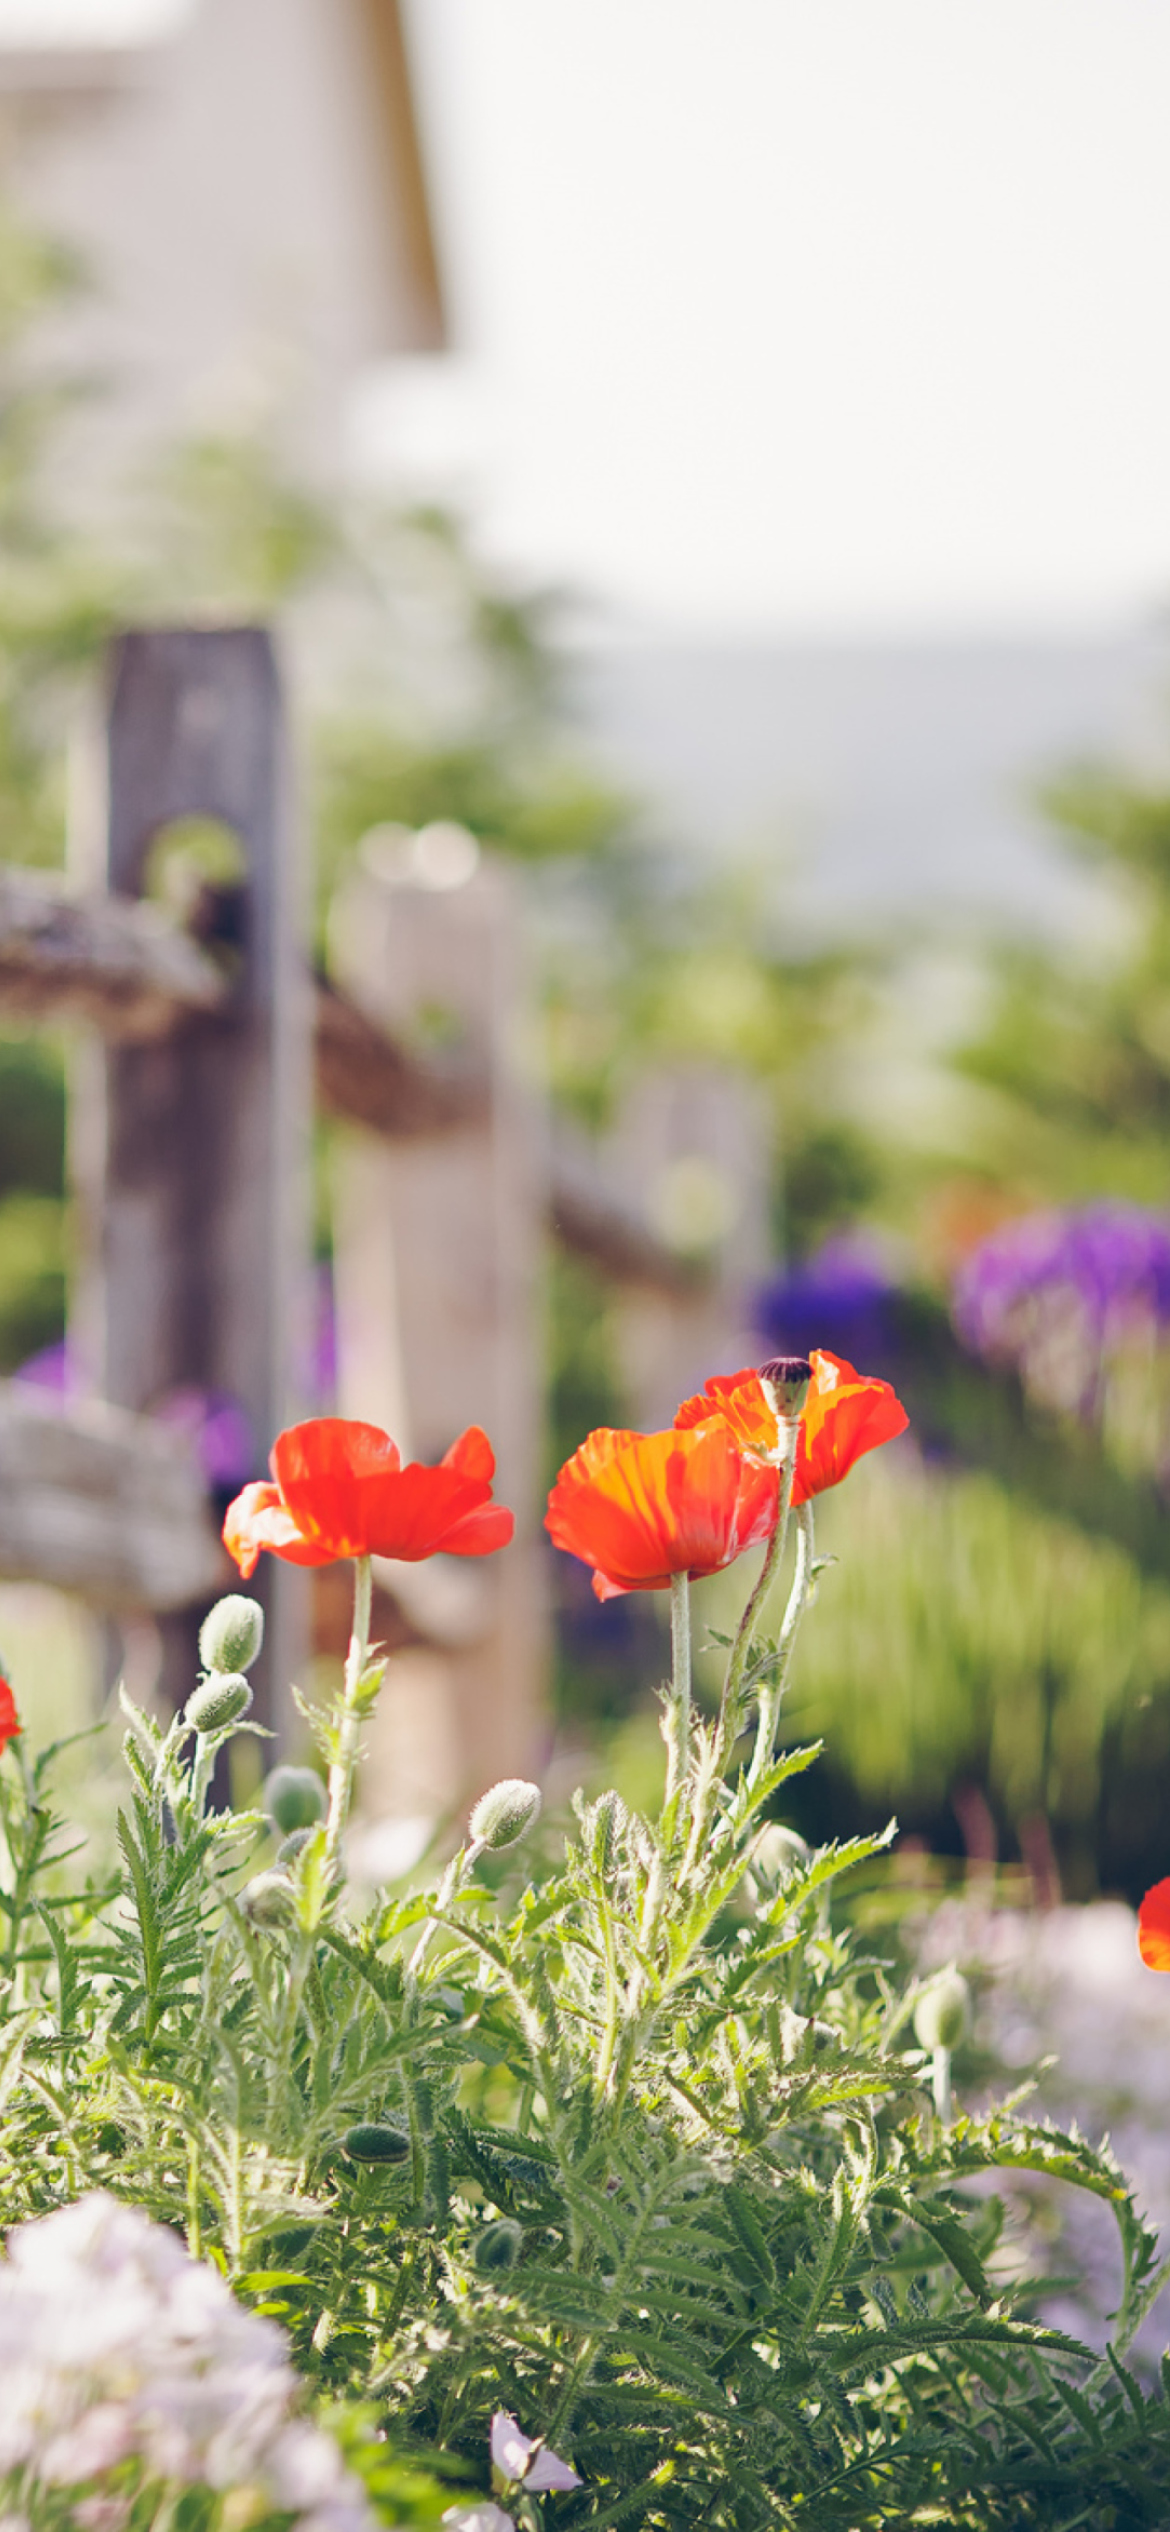 Poppy Flowers And Old Fence wallpaper 1170x2532